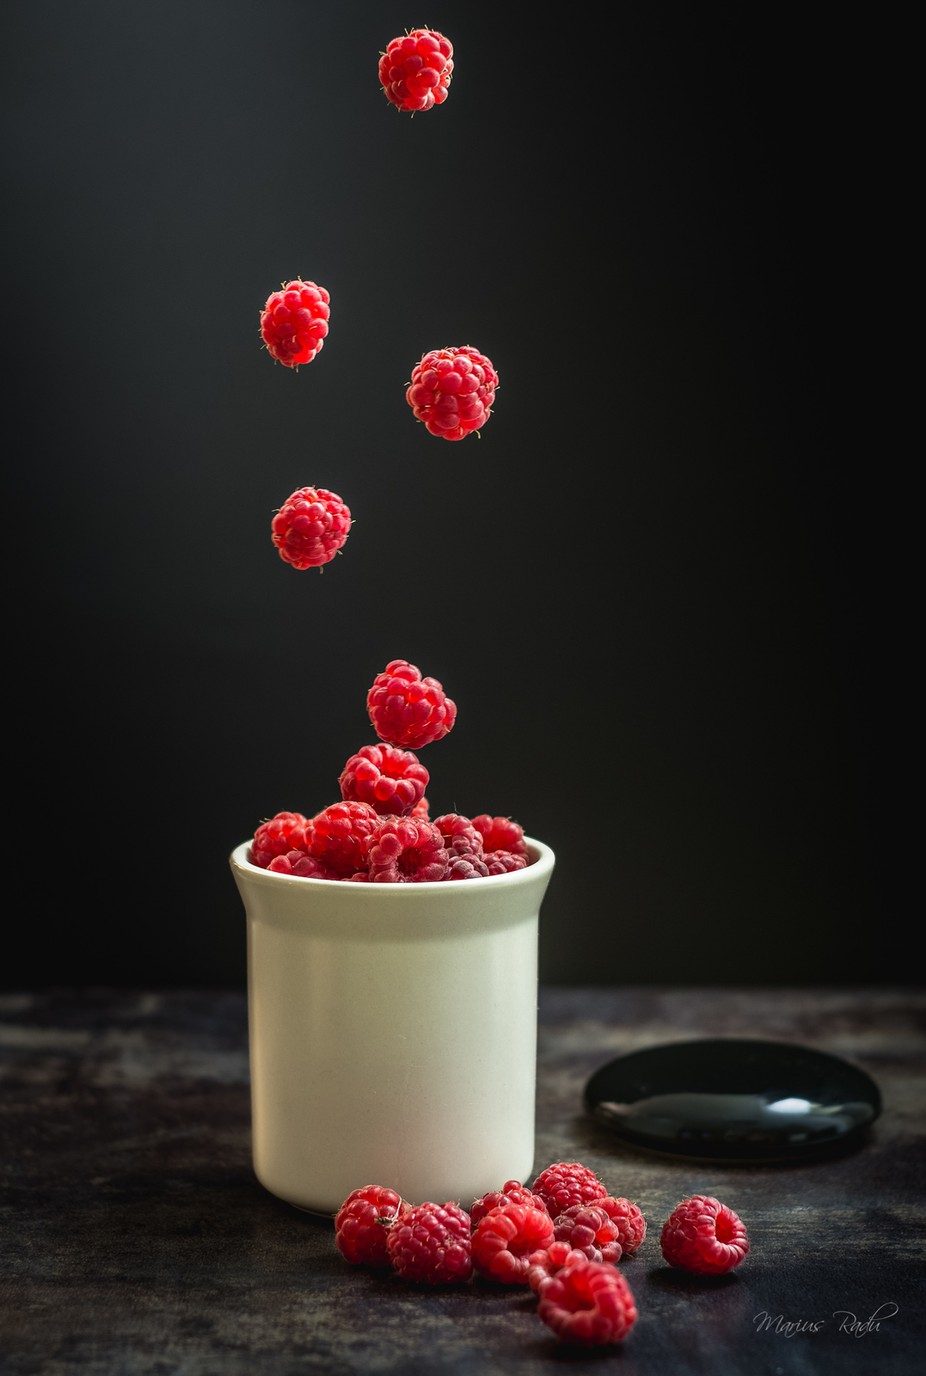 Flying raspberries by raducm - Looks Delicious Photo Contest